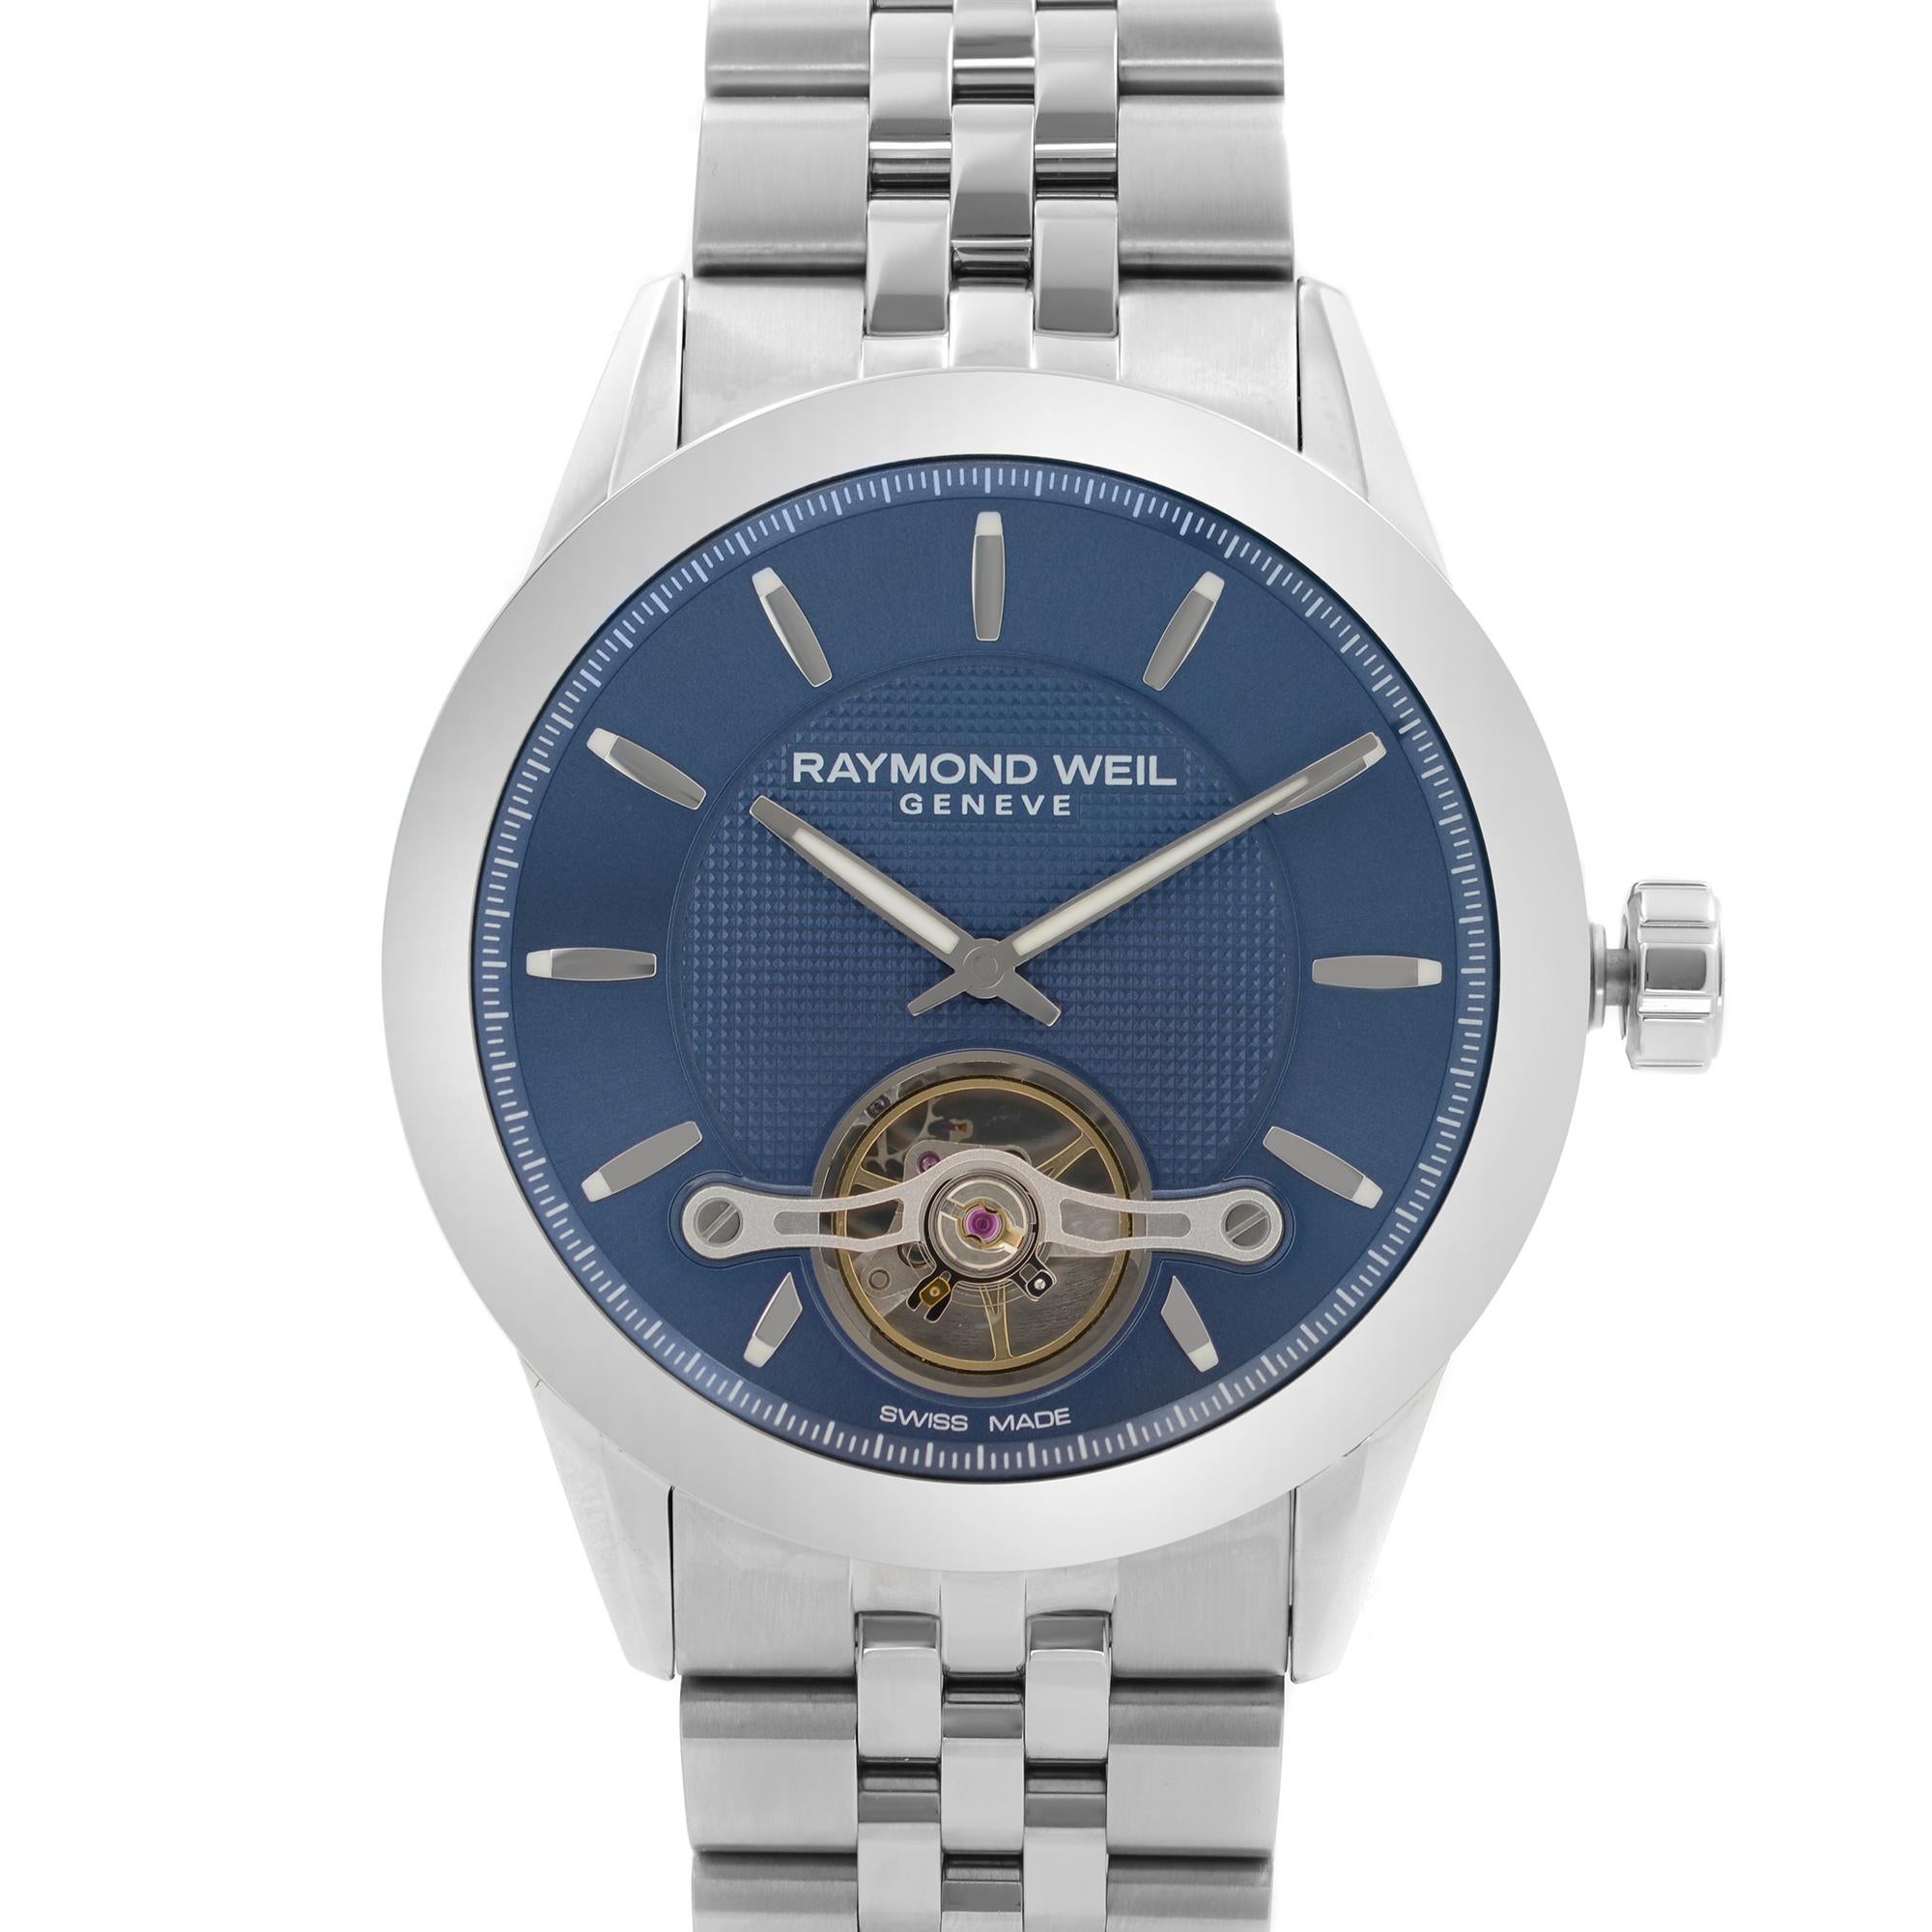 Unworn. Comes with an original box and papers.

Brand: RAYMOND WEIL  Department: Men  Model Number: 2780-ST-50001  Country/Region of Manufacture: Switzerland  Model: Raymond Weil Freelancer  Style: Dress/Formal  Band Color: Silver  Dial Color: Blue 